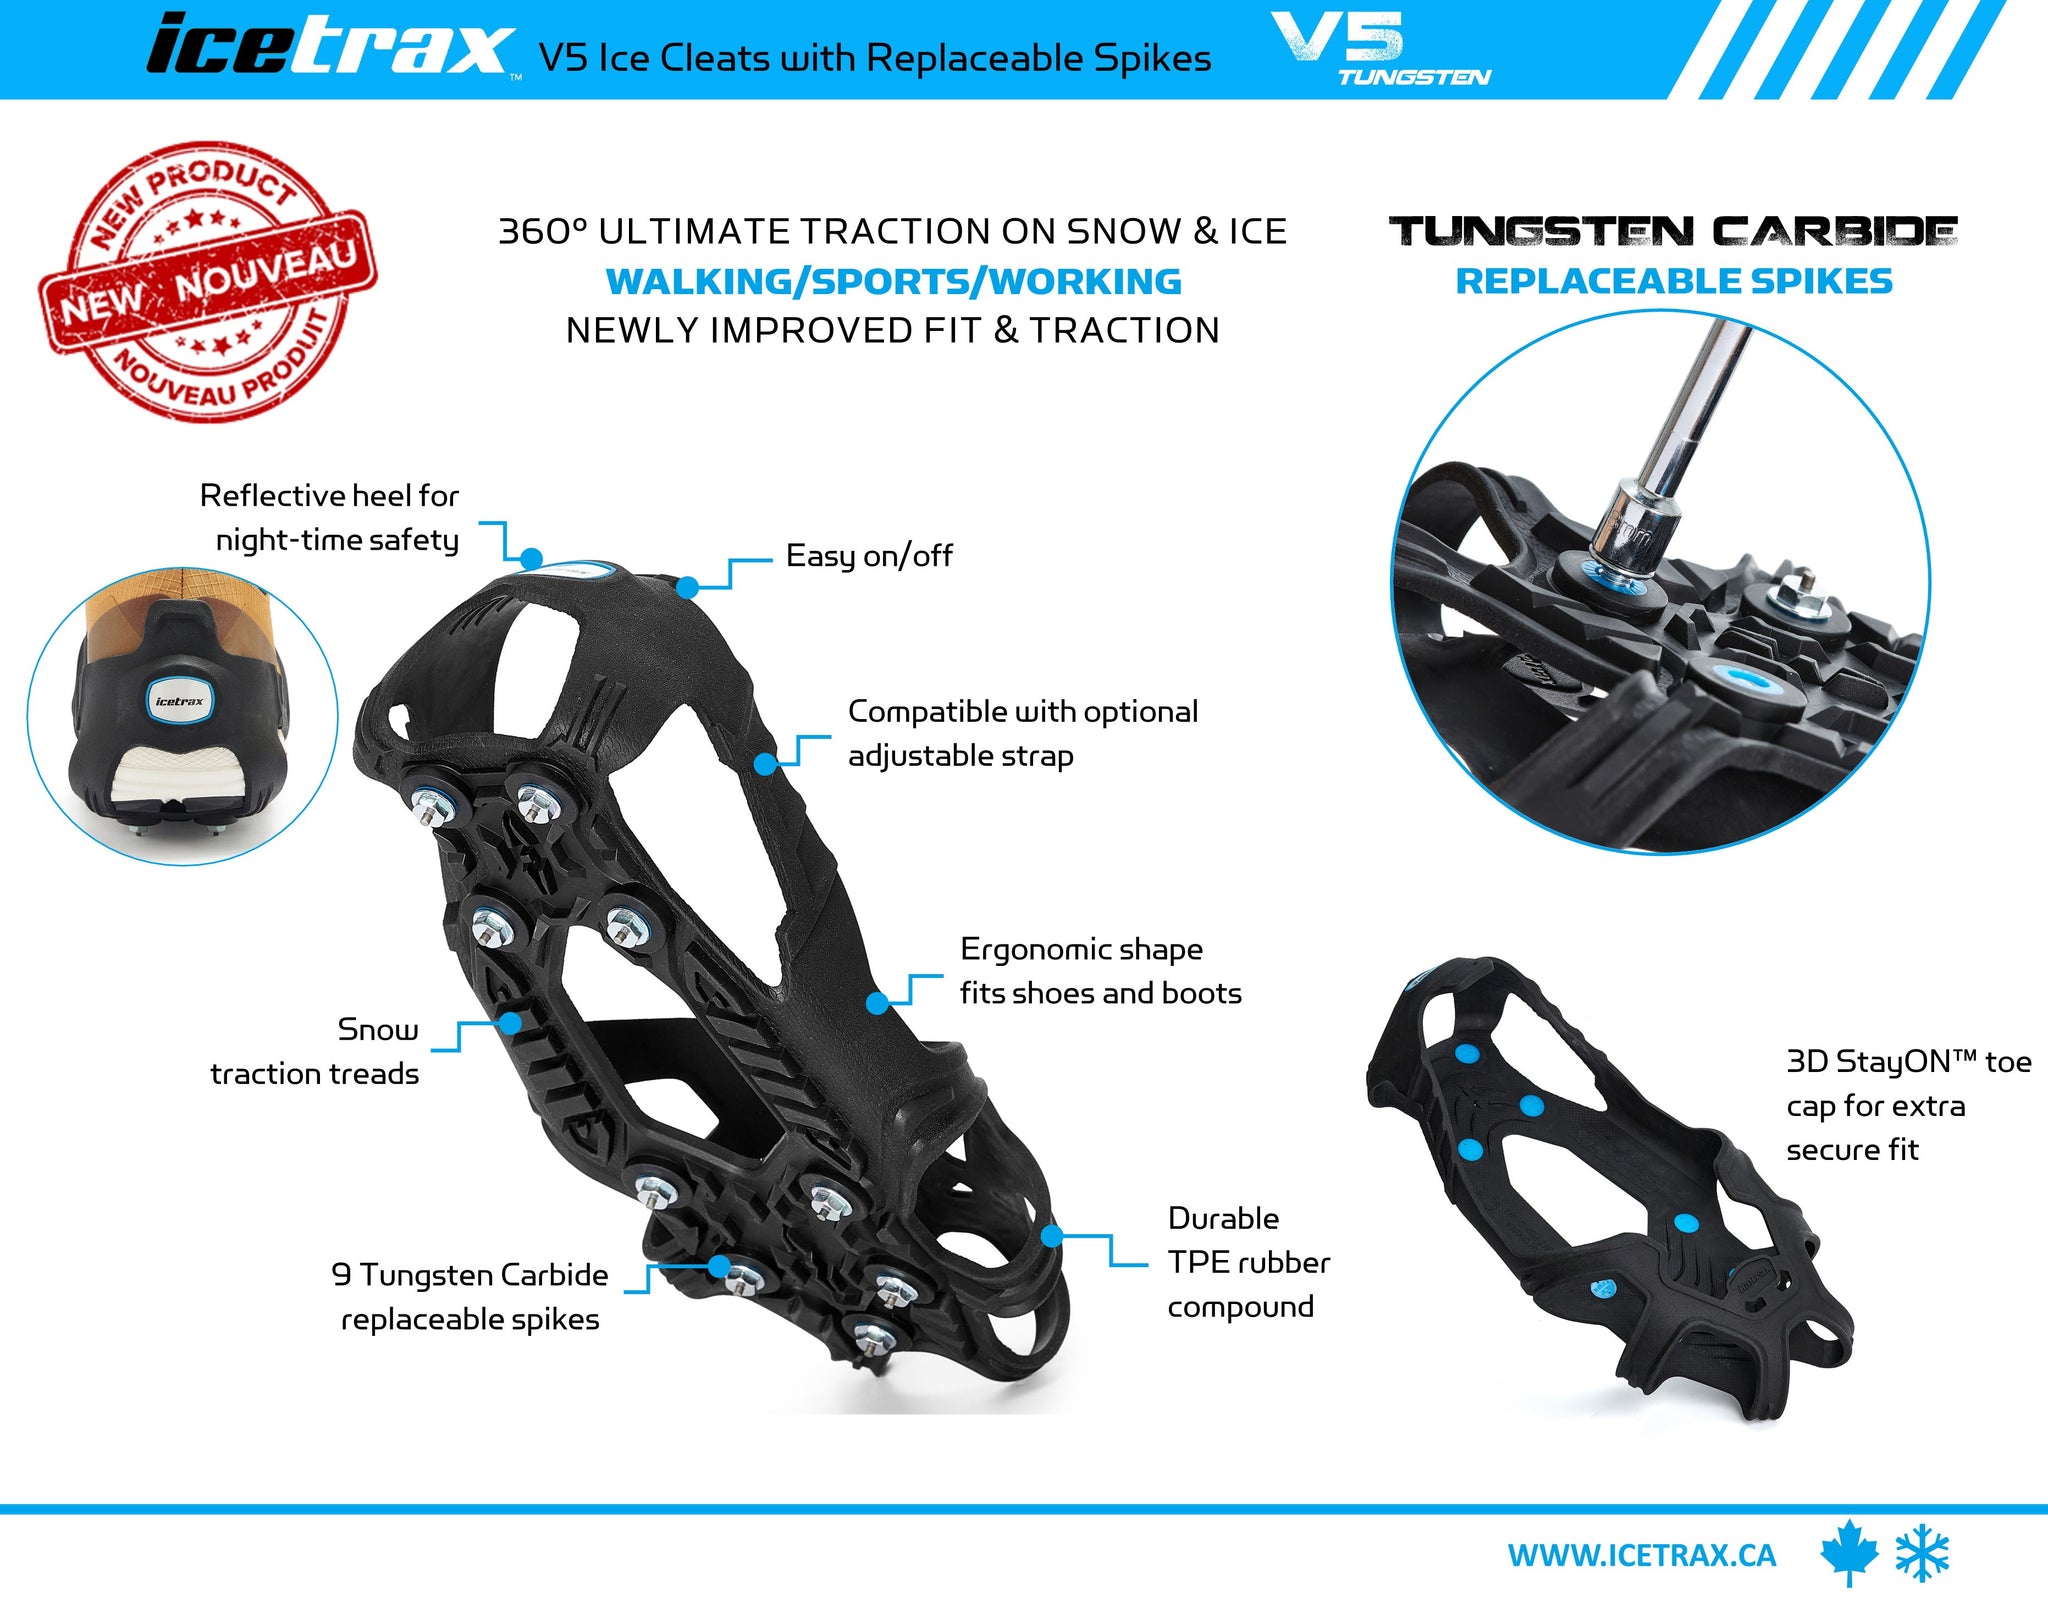 ICETRAX V5 Ice Cleats, Easy to Replace Spikes, Ice Grips for Shoes and Boots, StayON Toe, Reflective Heel